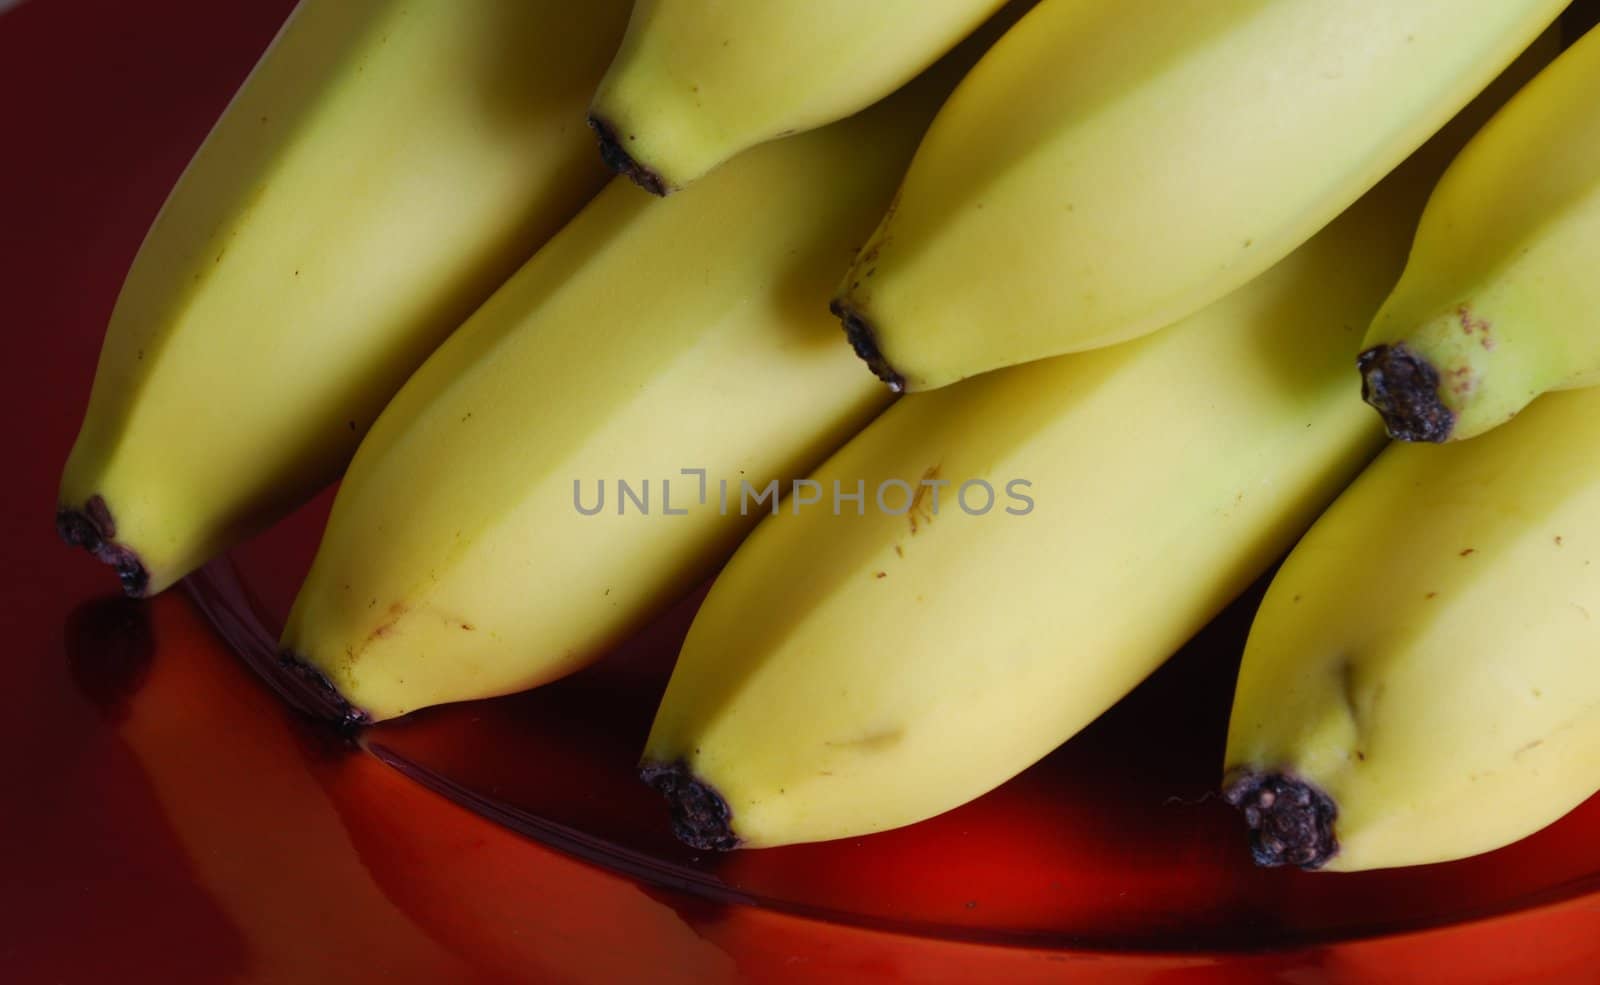 Bananas on a red plate by luissantos84